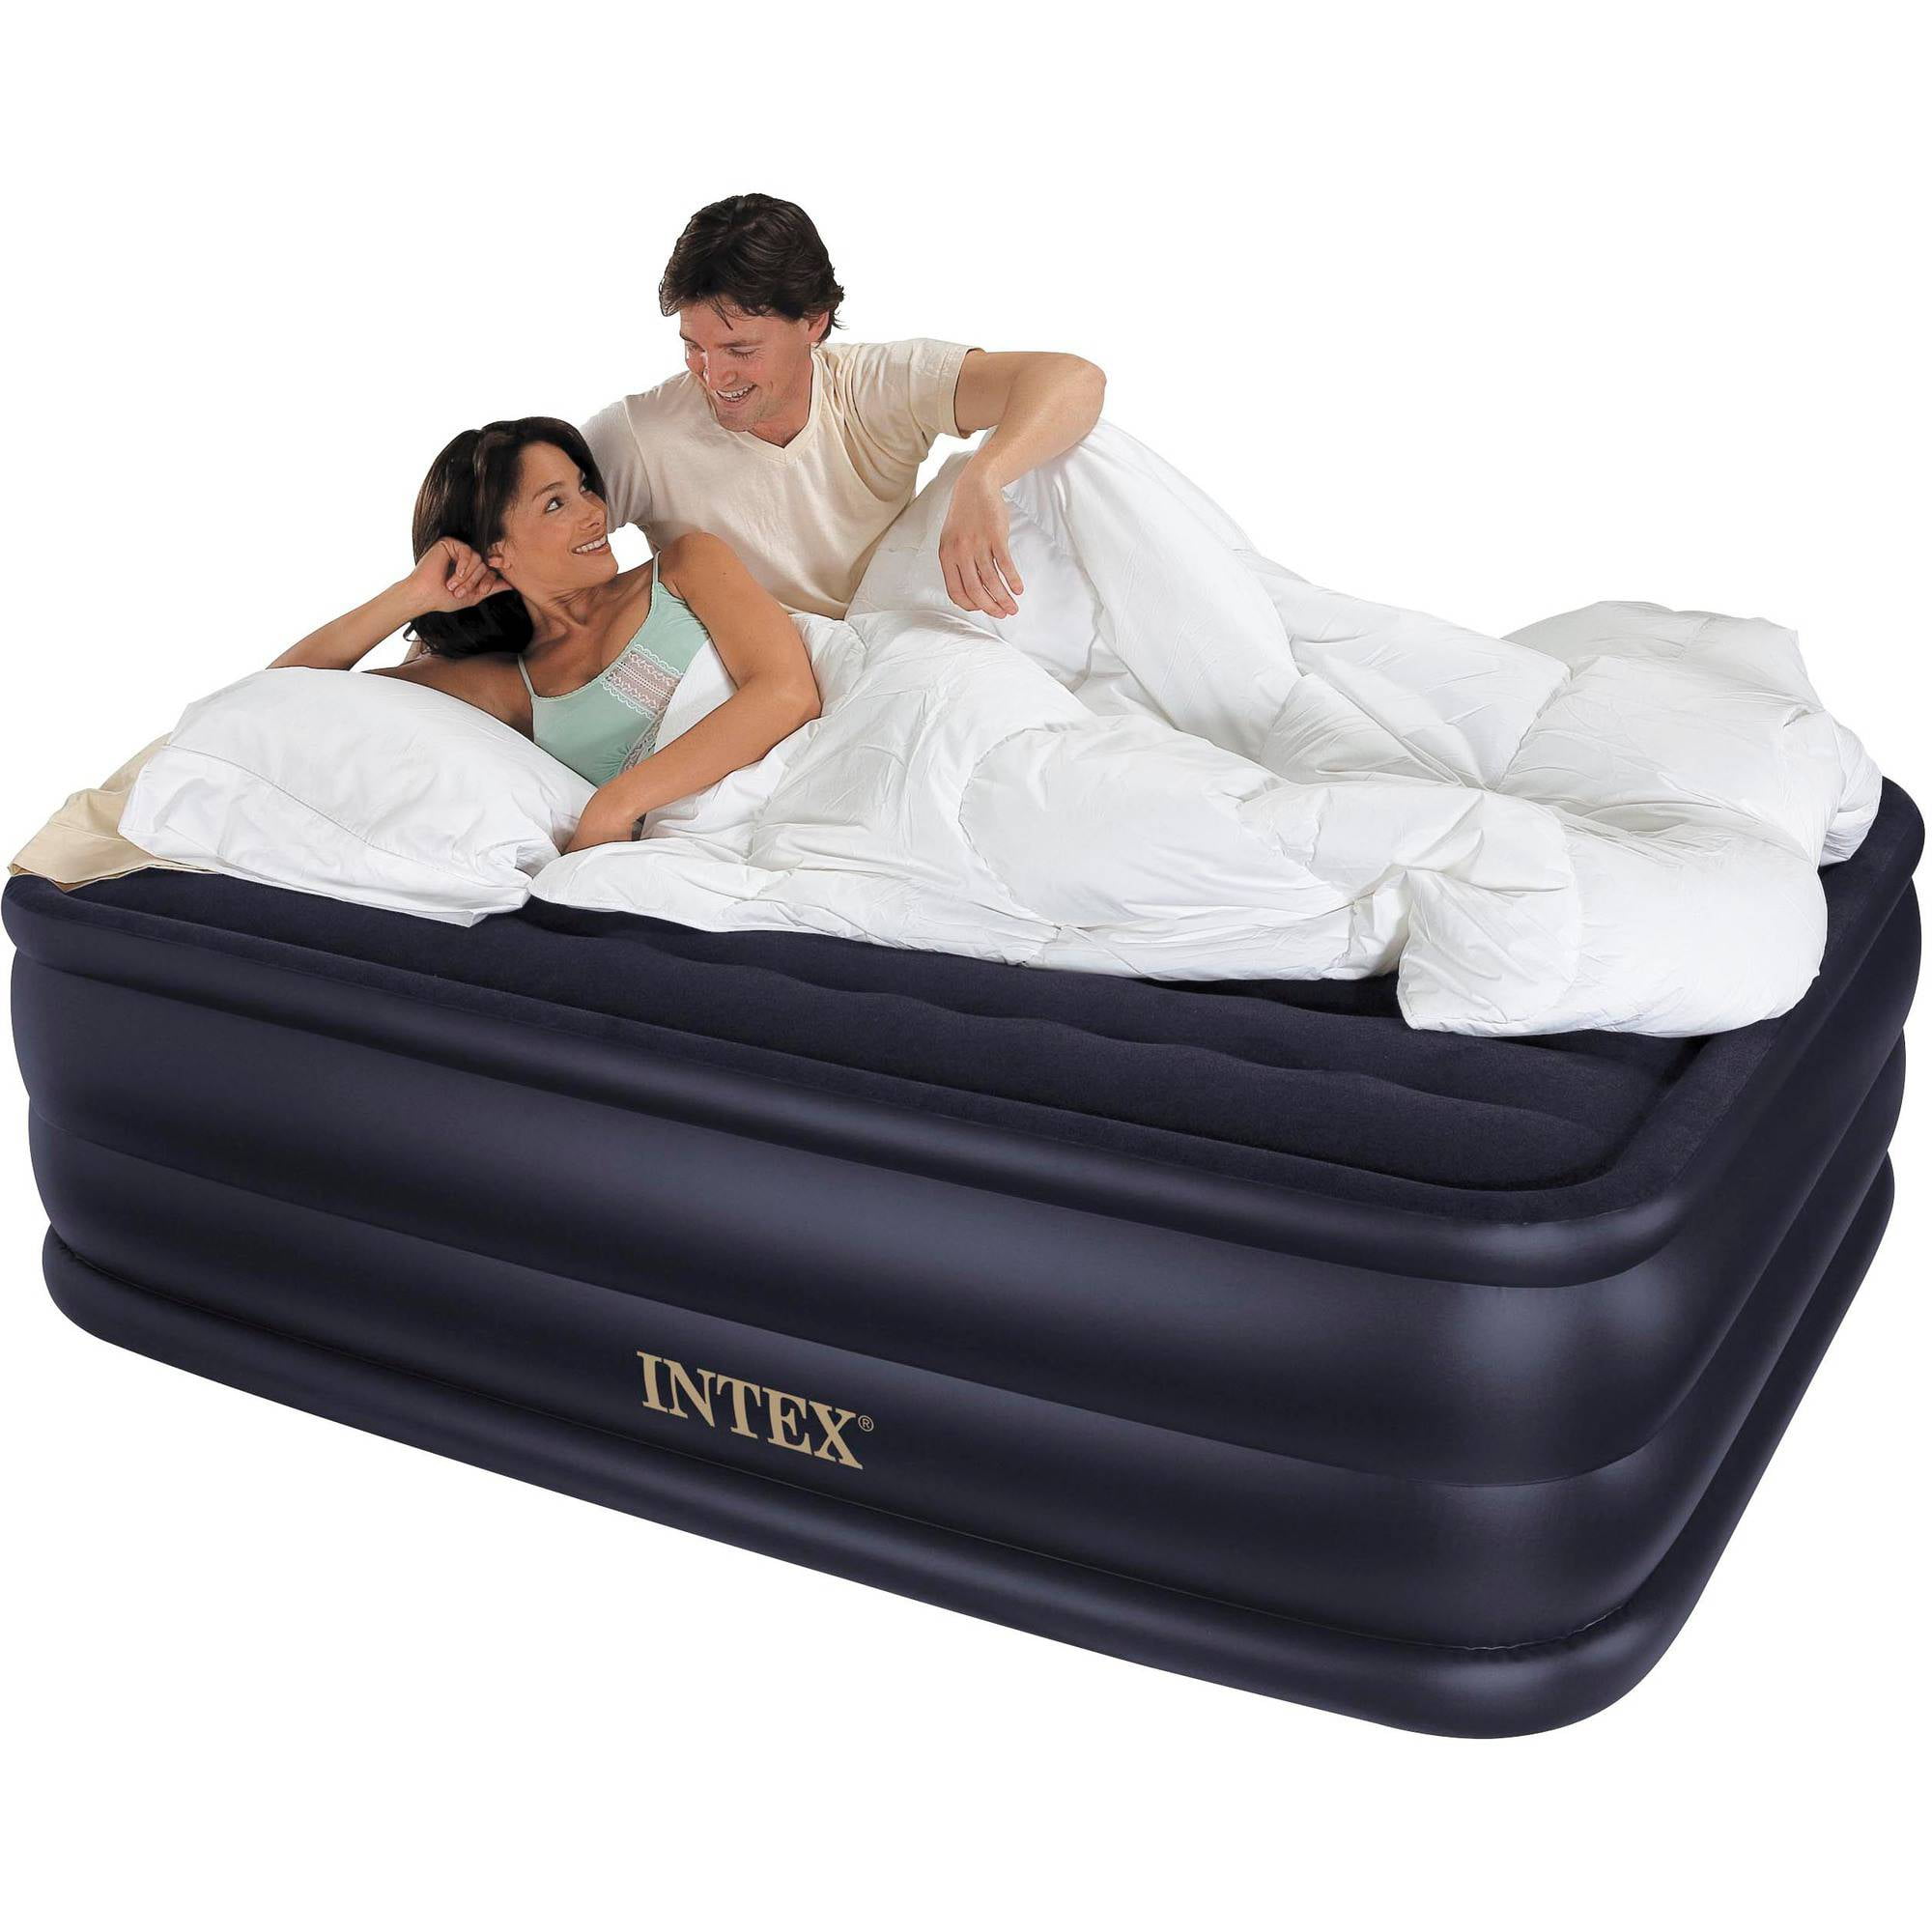 Queen Size Air Bed Mattress With Built-In Electric Pump Raised Intex Guests Beds 